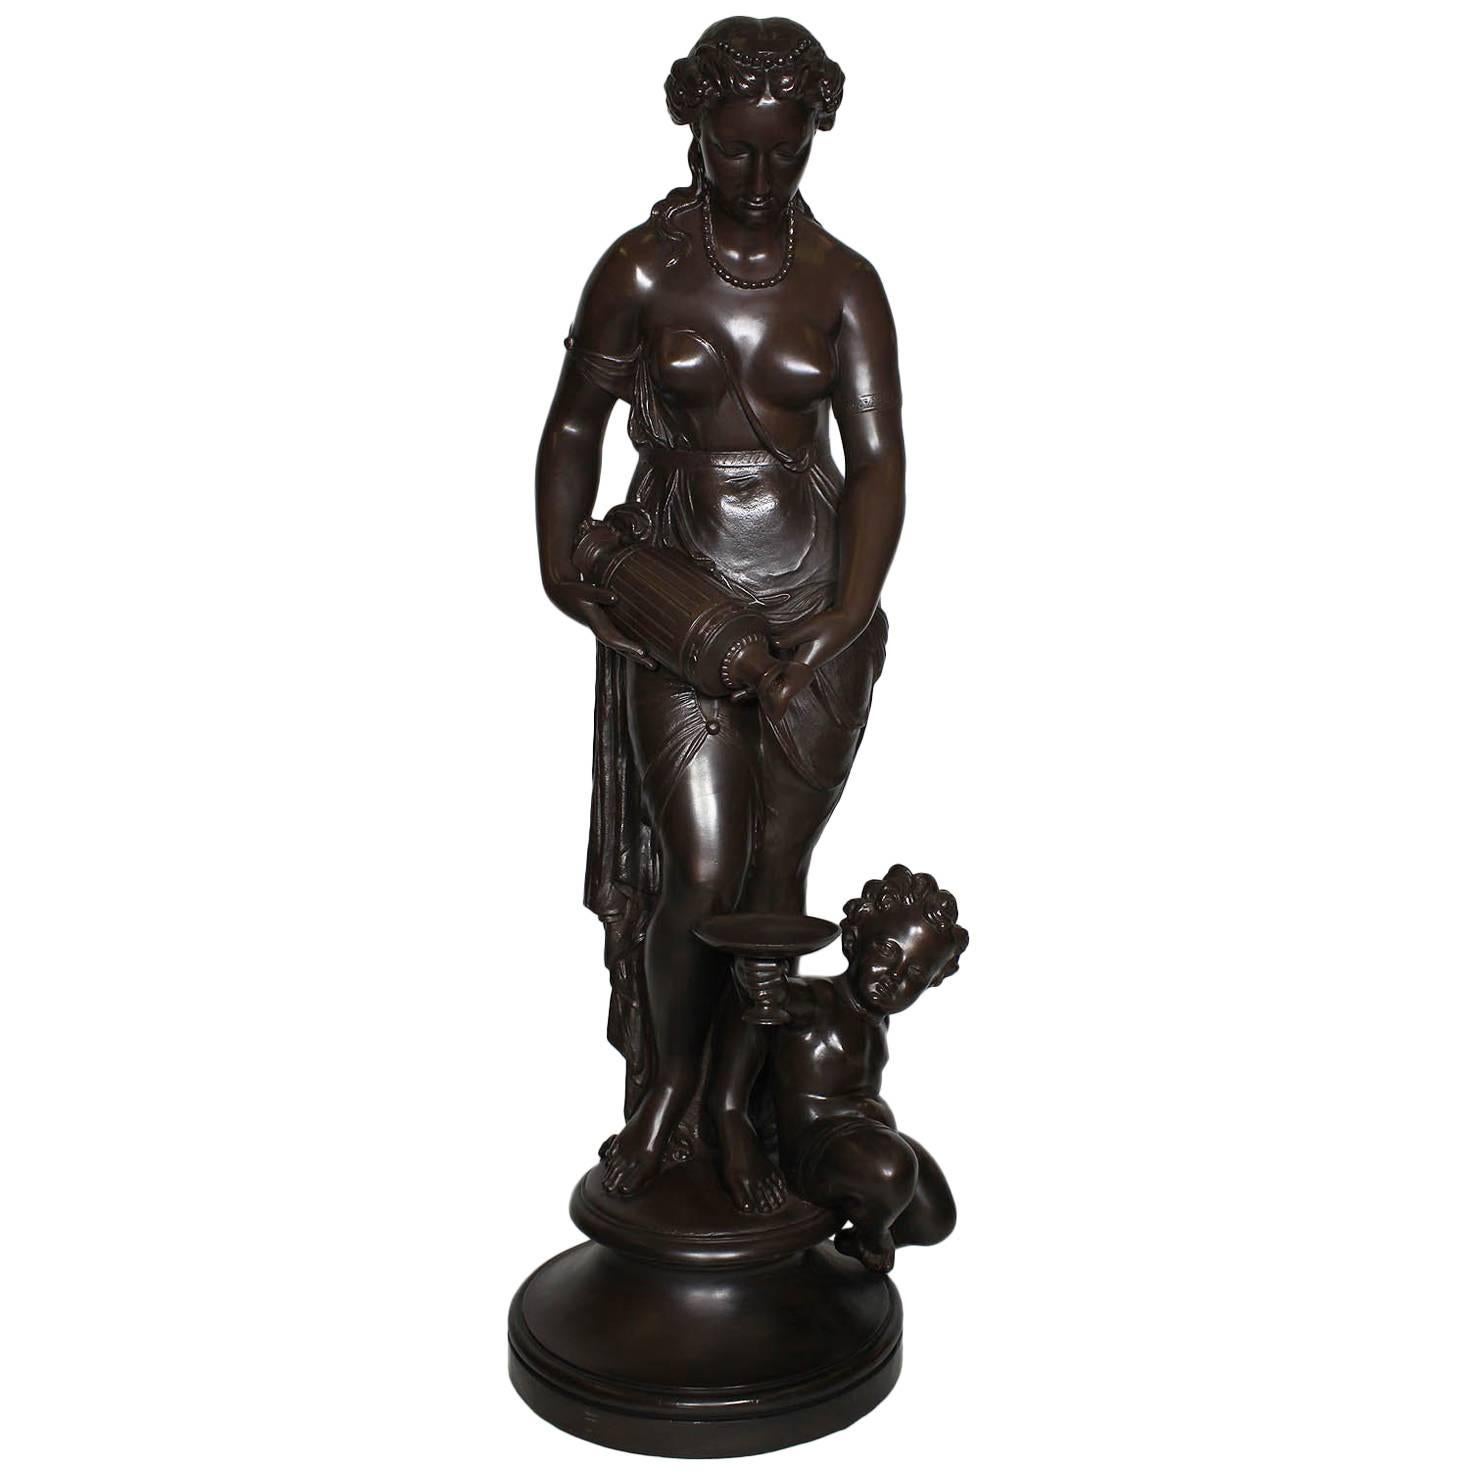 French 19th Century Cast-Iron Group "A Maiden with Putto" after Pierre Charrier